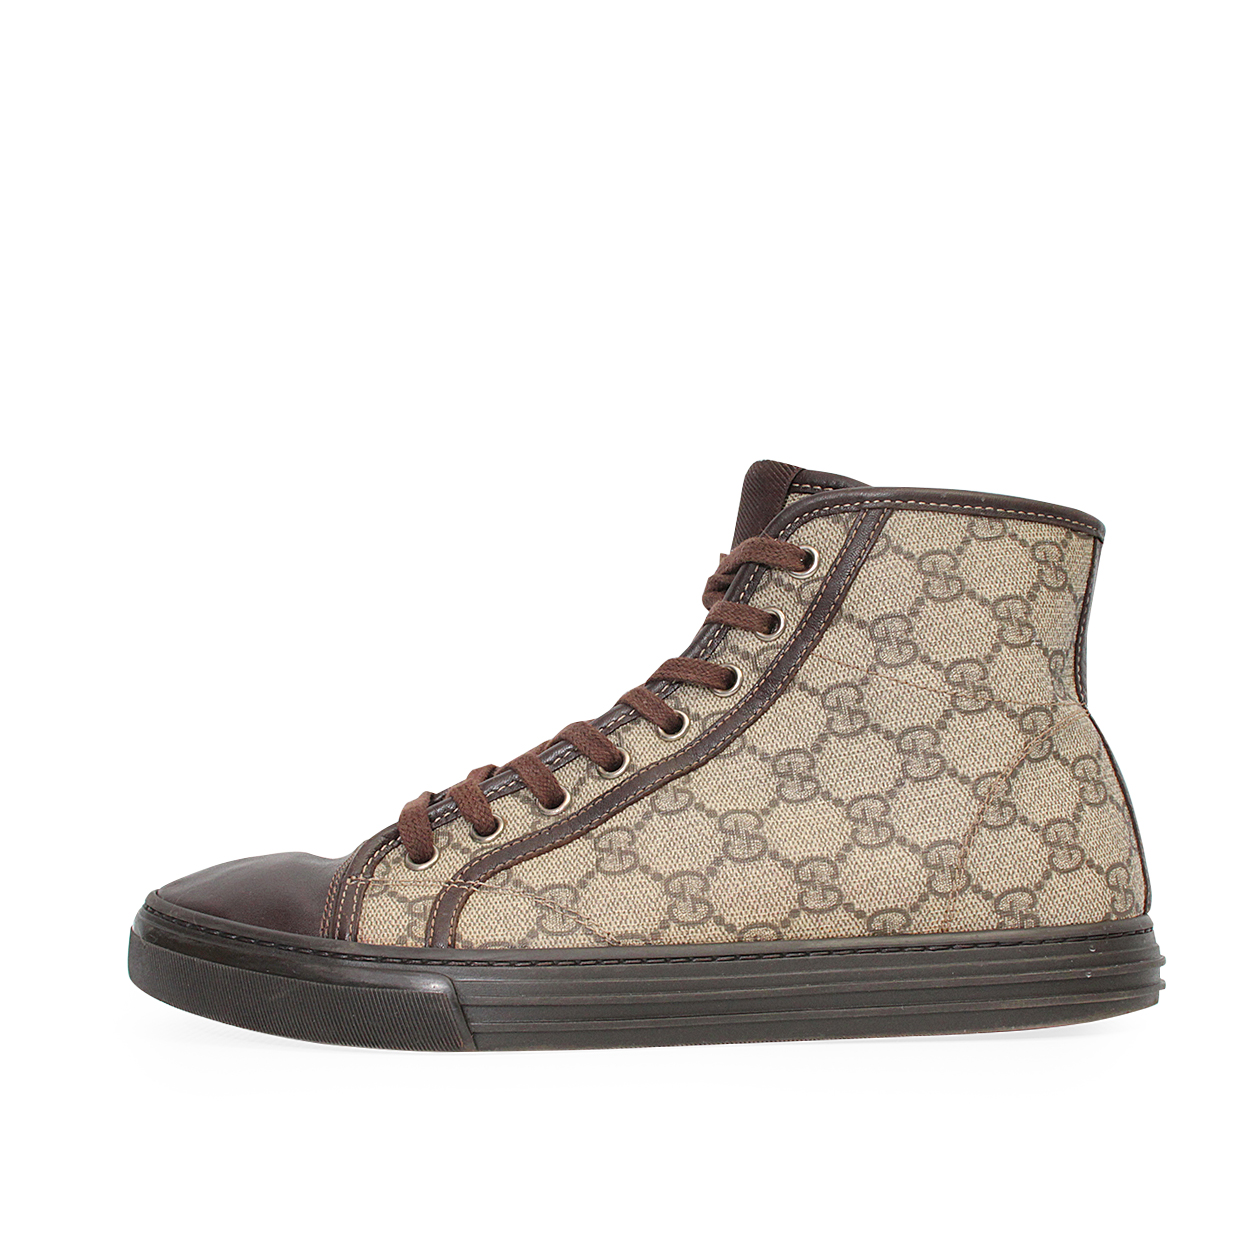 GUCCI GG Supreme/Leather High Top Sneakers Beige/Ebony - S: 40 (6.5 ...